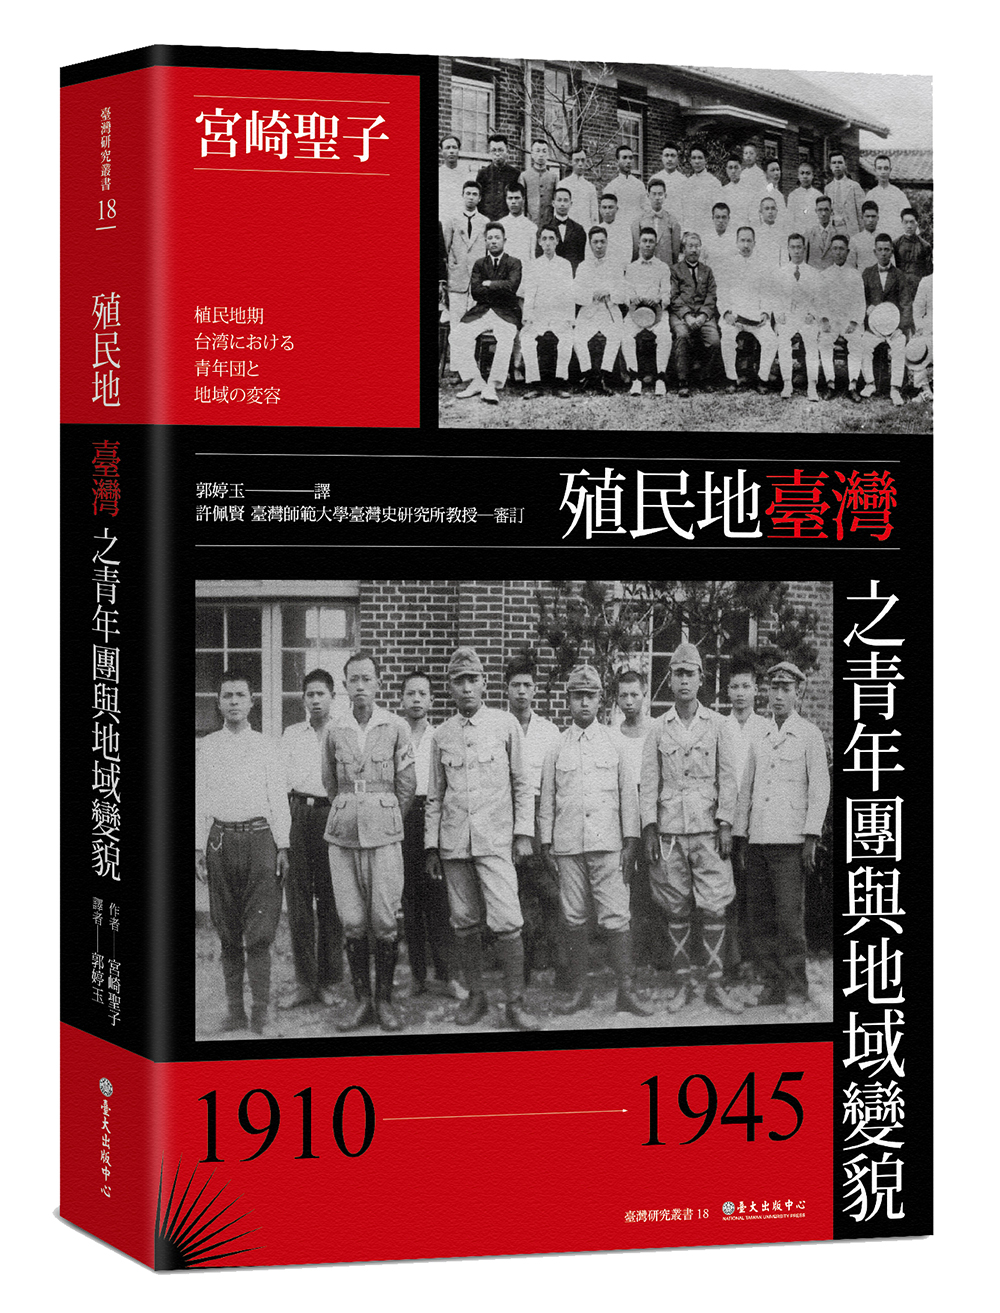 Young Men's Association and Regional Change in Japanese Colonial Taiwan (1910-1945)